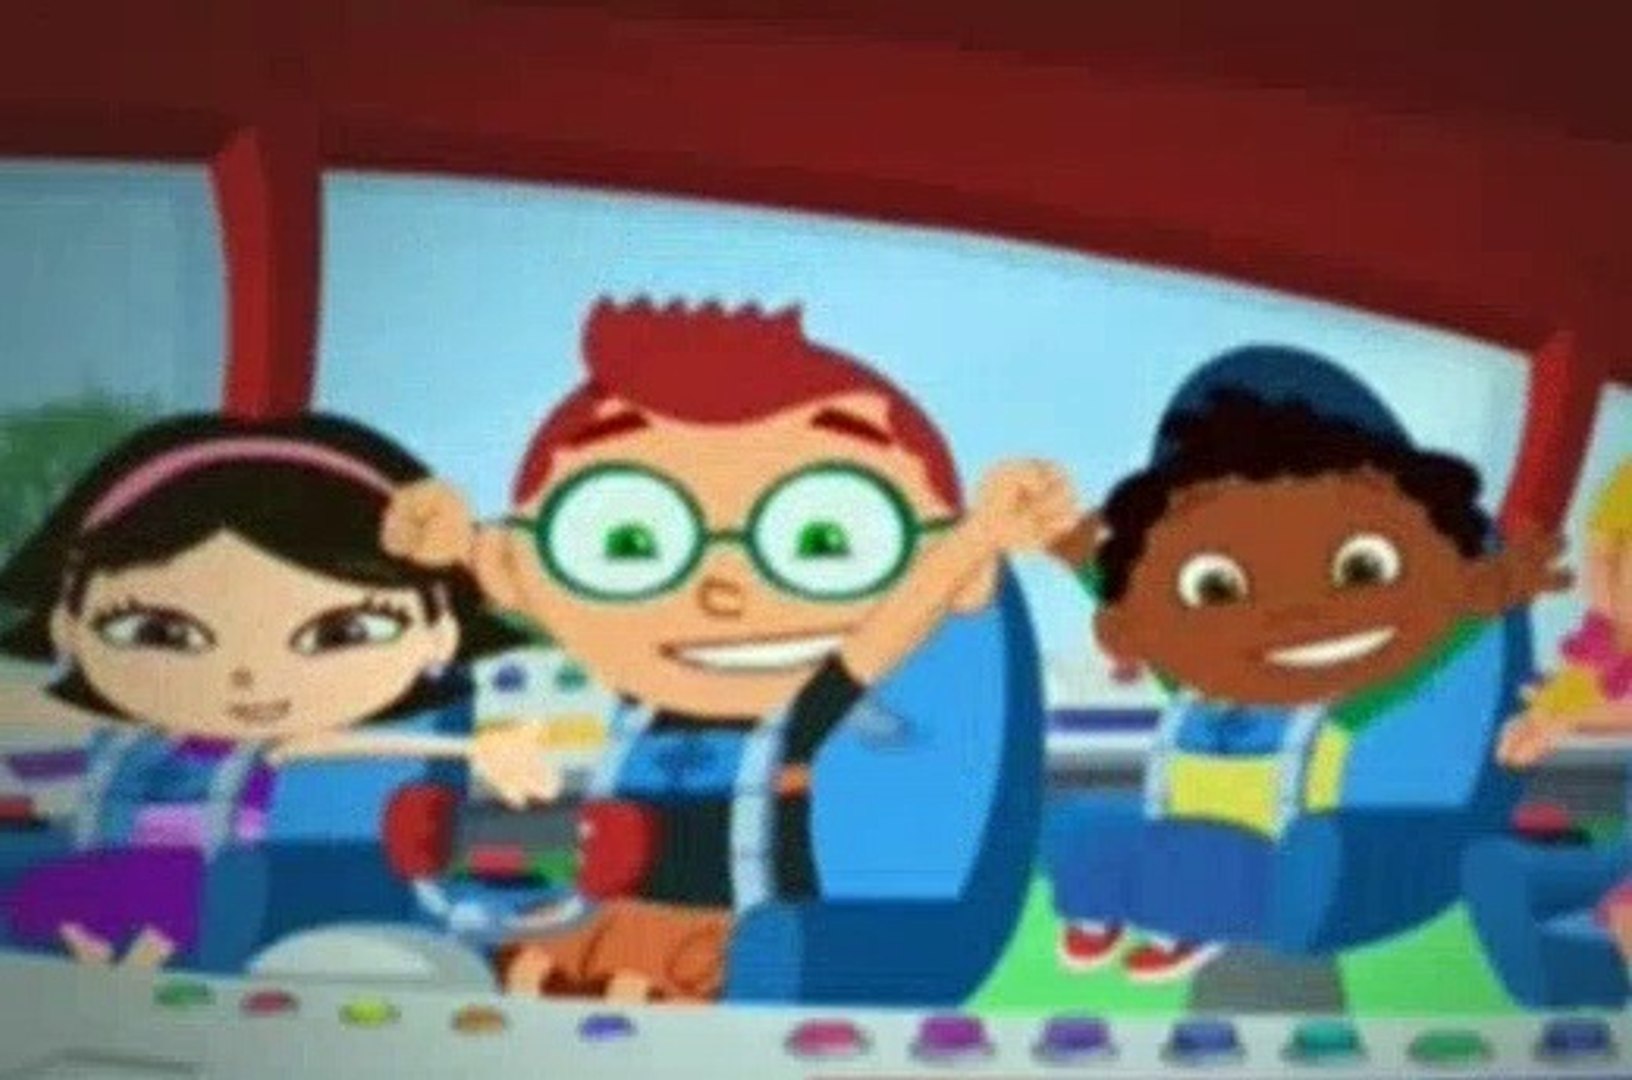 Little Einsteins S04E12 - Animal Snack Time - video Dailymotion